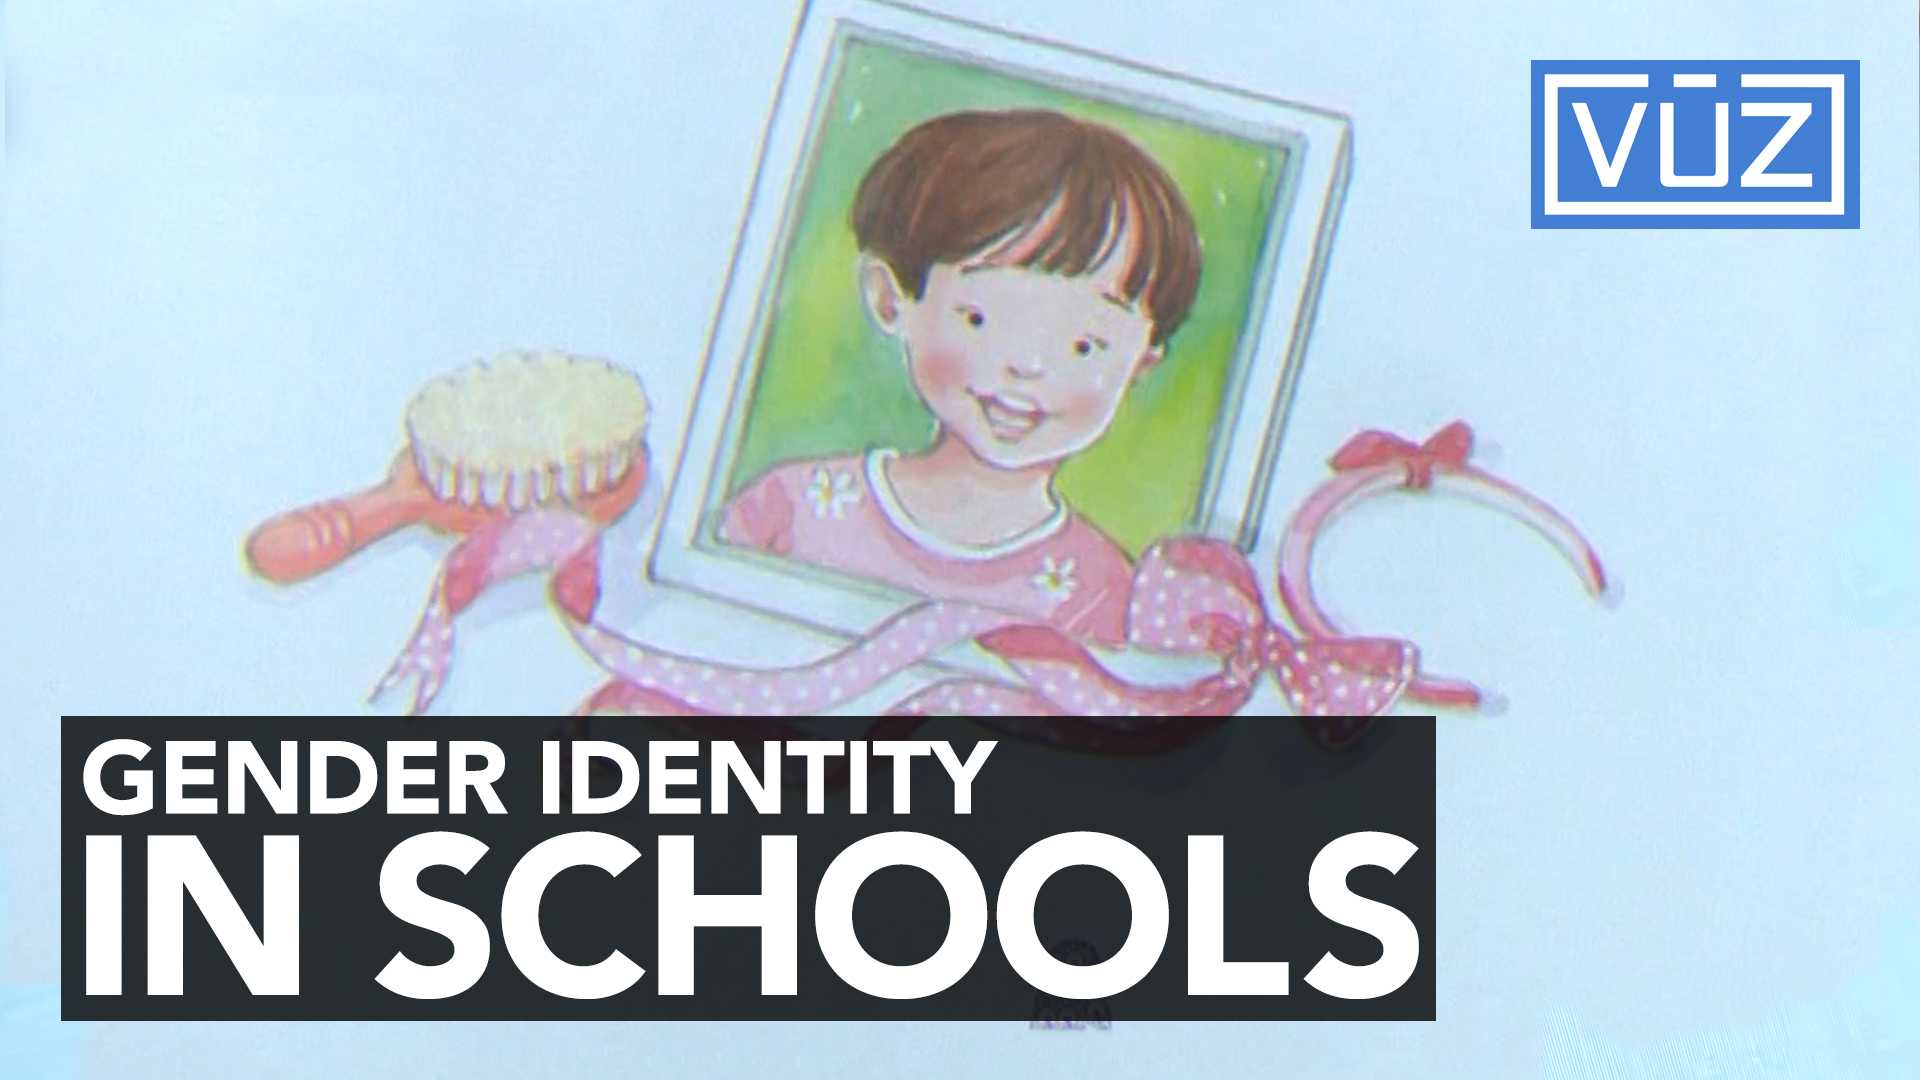 Children’s book about transgendered girl produces controversy